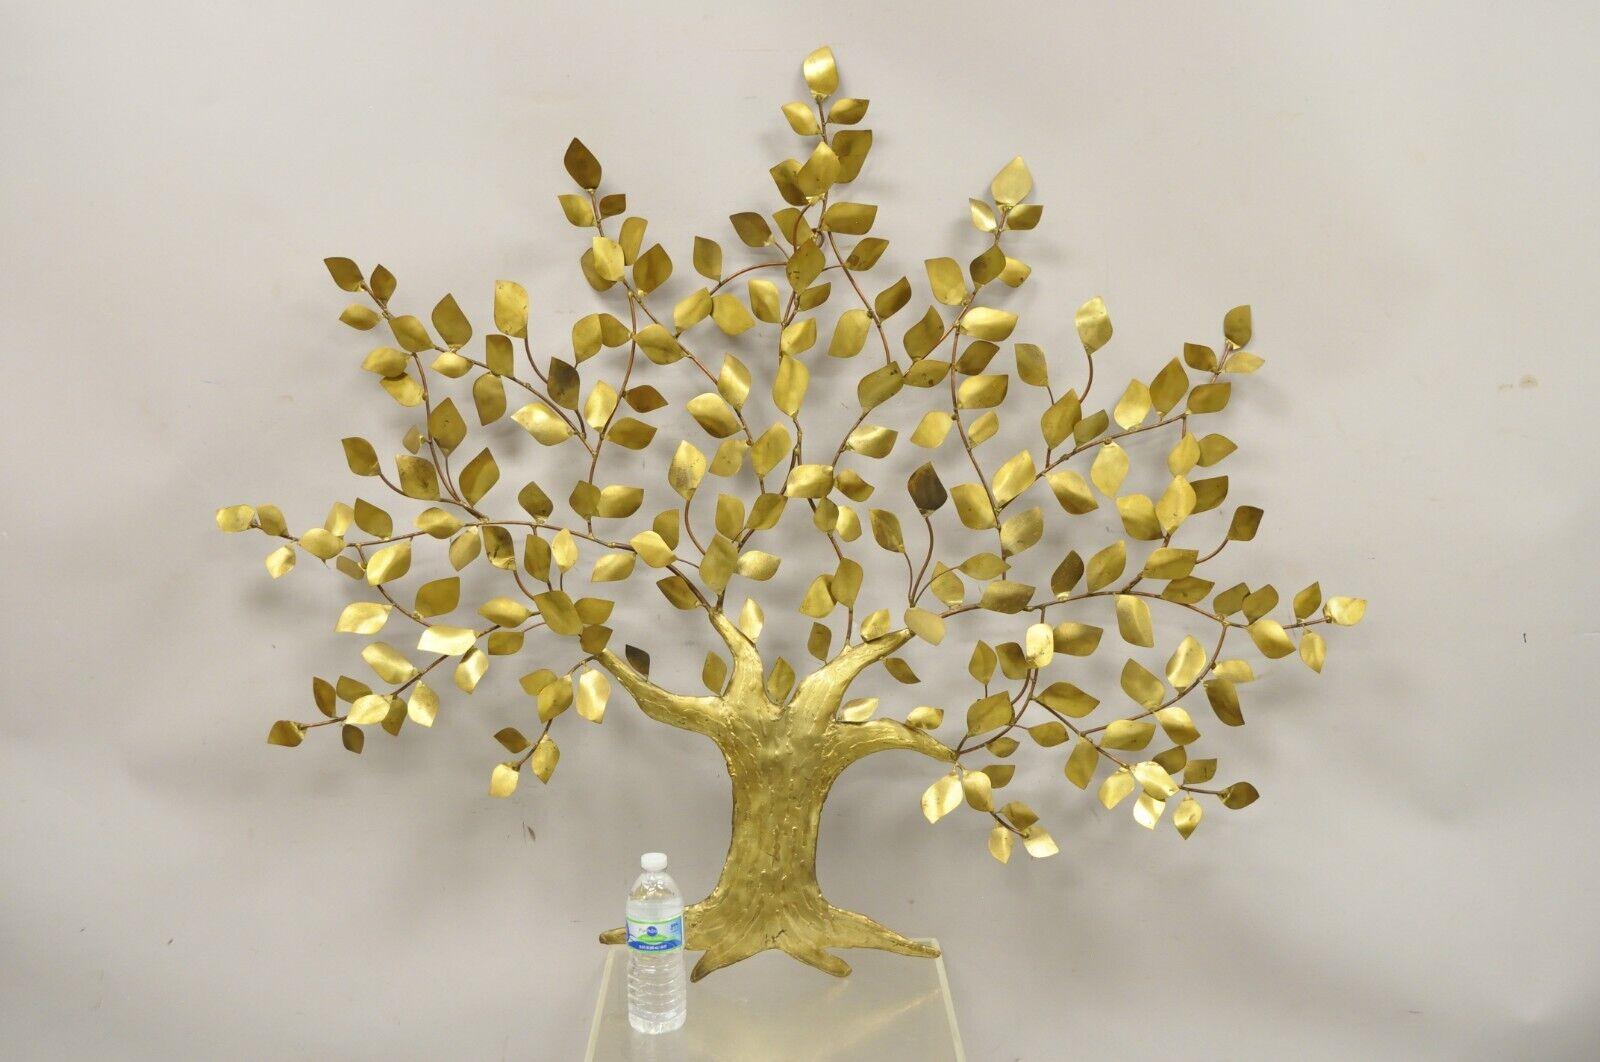 Bergasse Mid-Century Modern brass tree of life large wall art sculpture. Item features a signed to leaf, large impressive size, very nice vintage item, great style and form. Circa 1960s. Measurements: 44